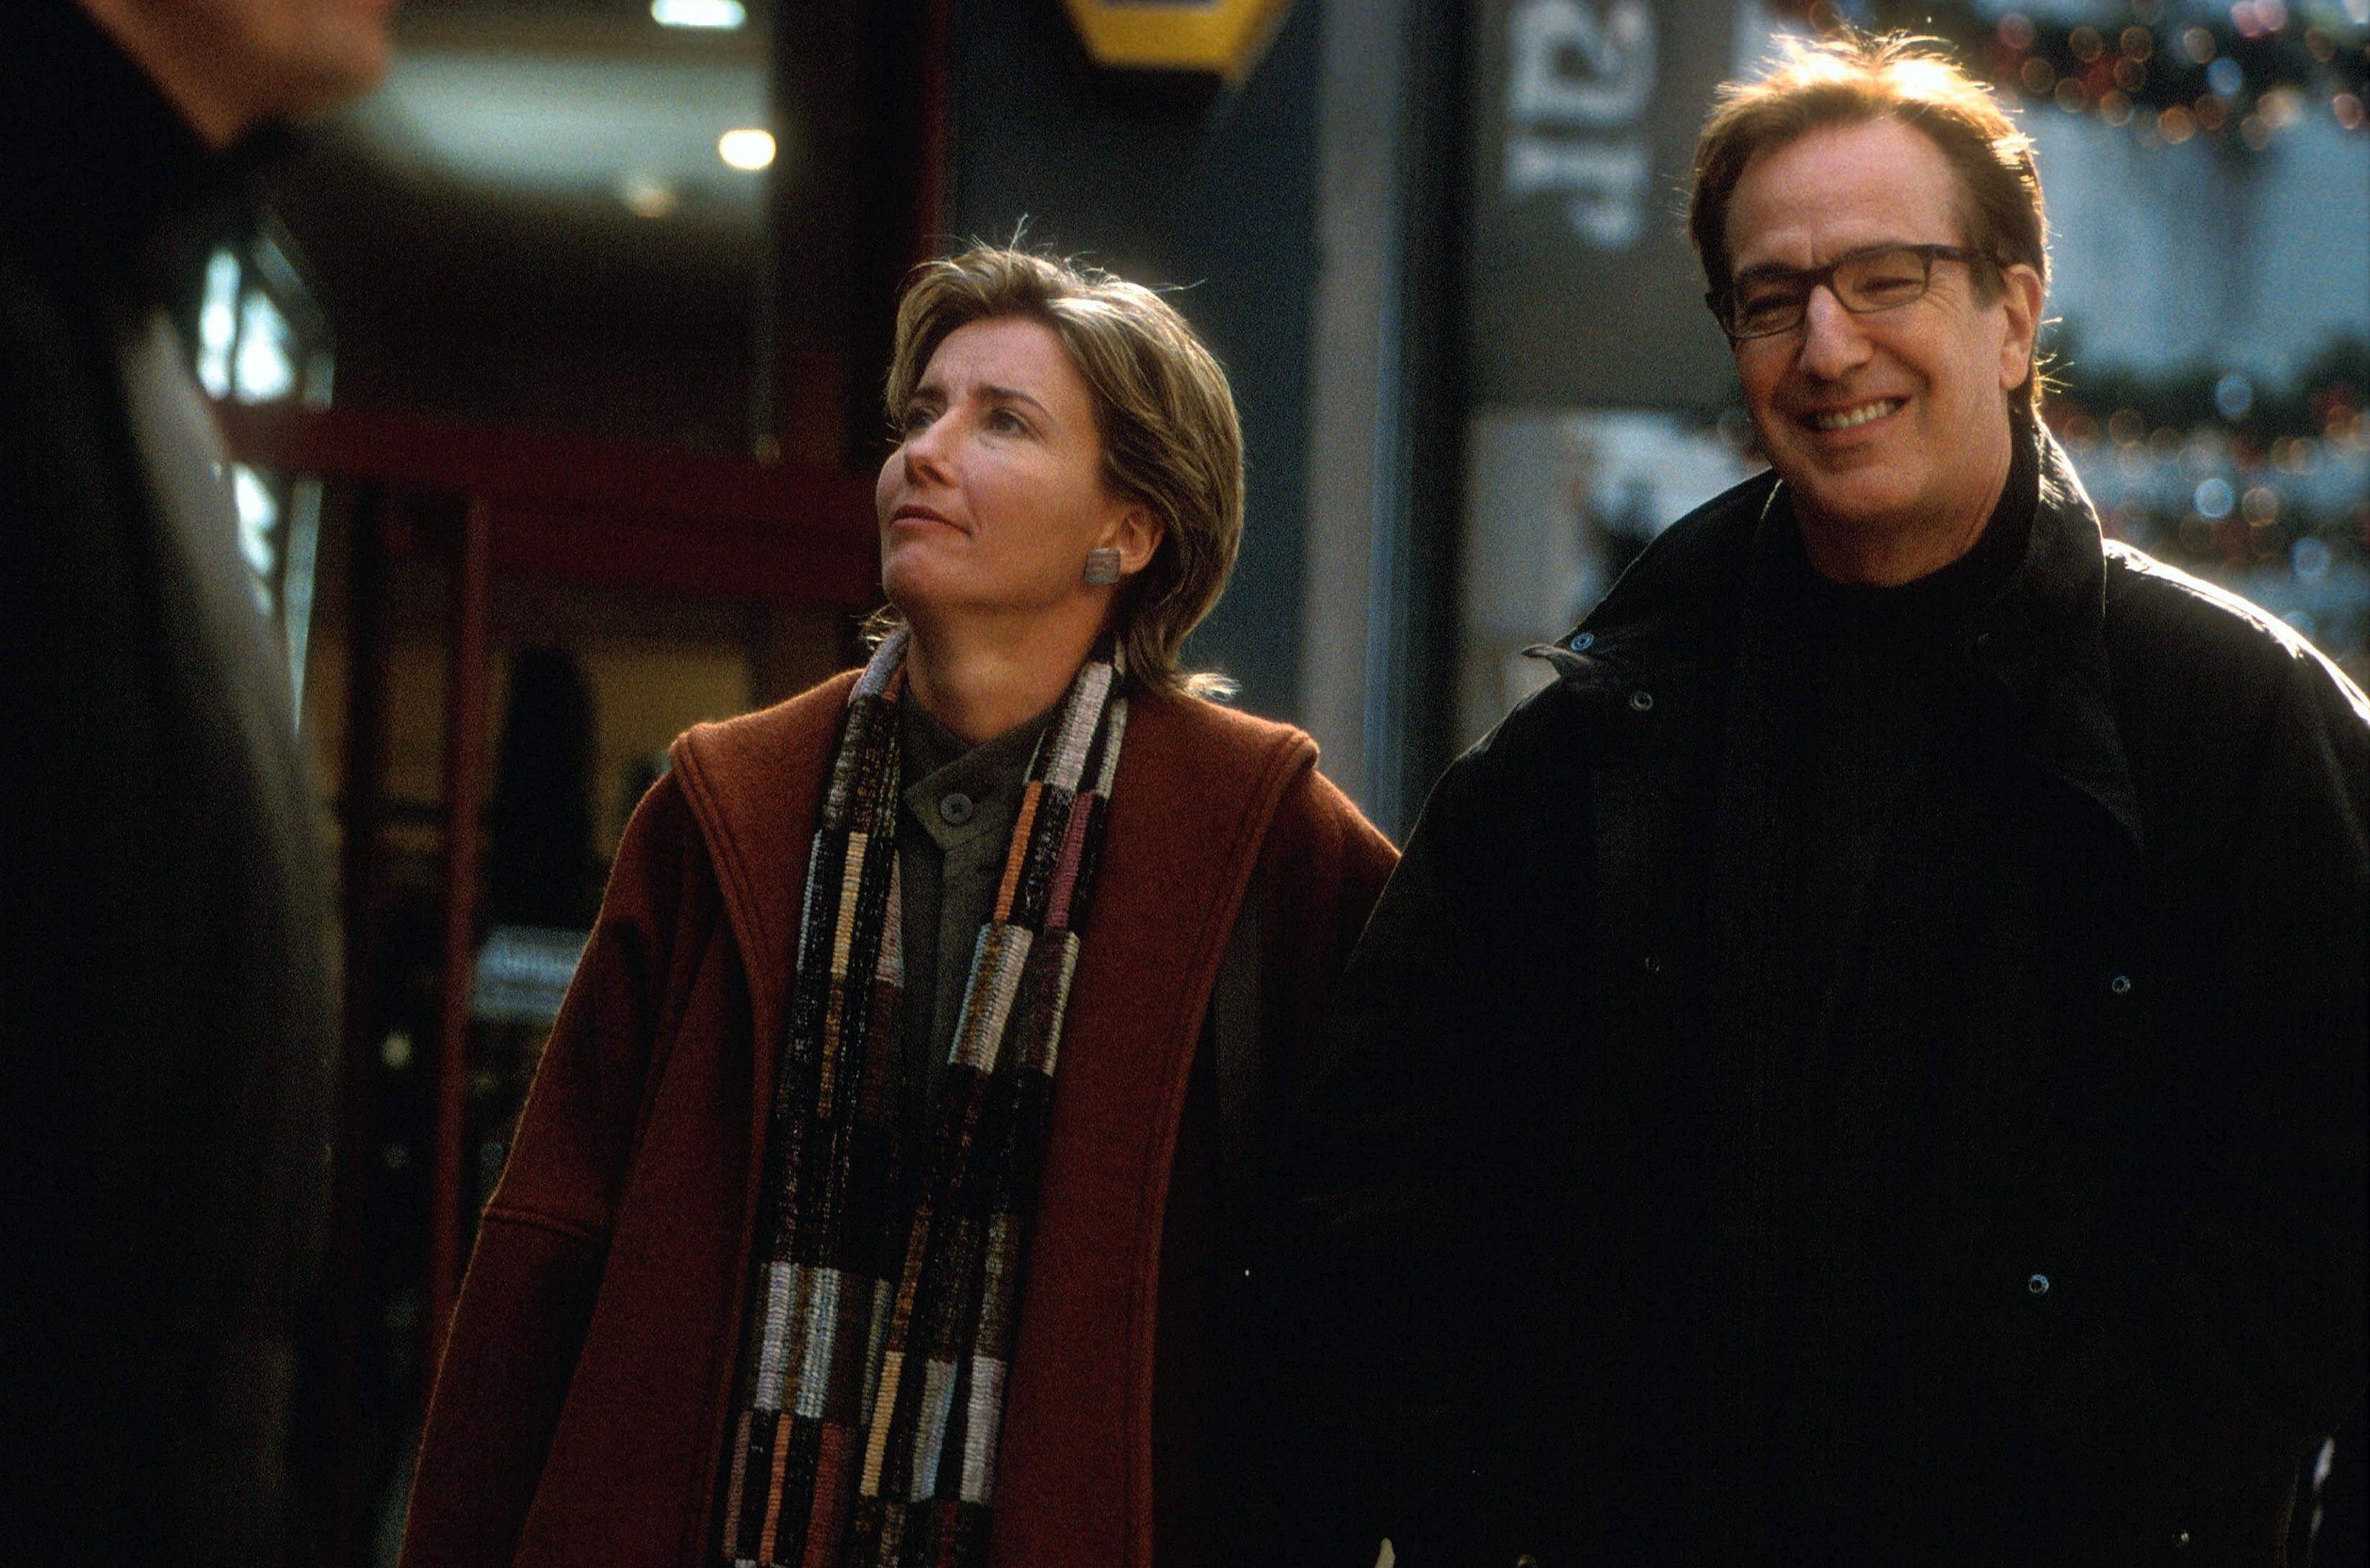 The Love Actually Couples Ranked